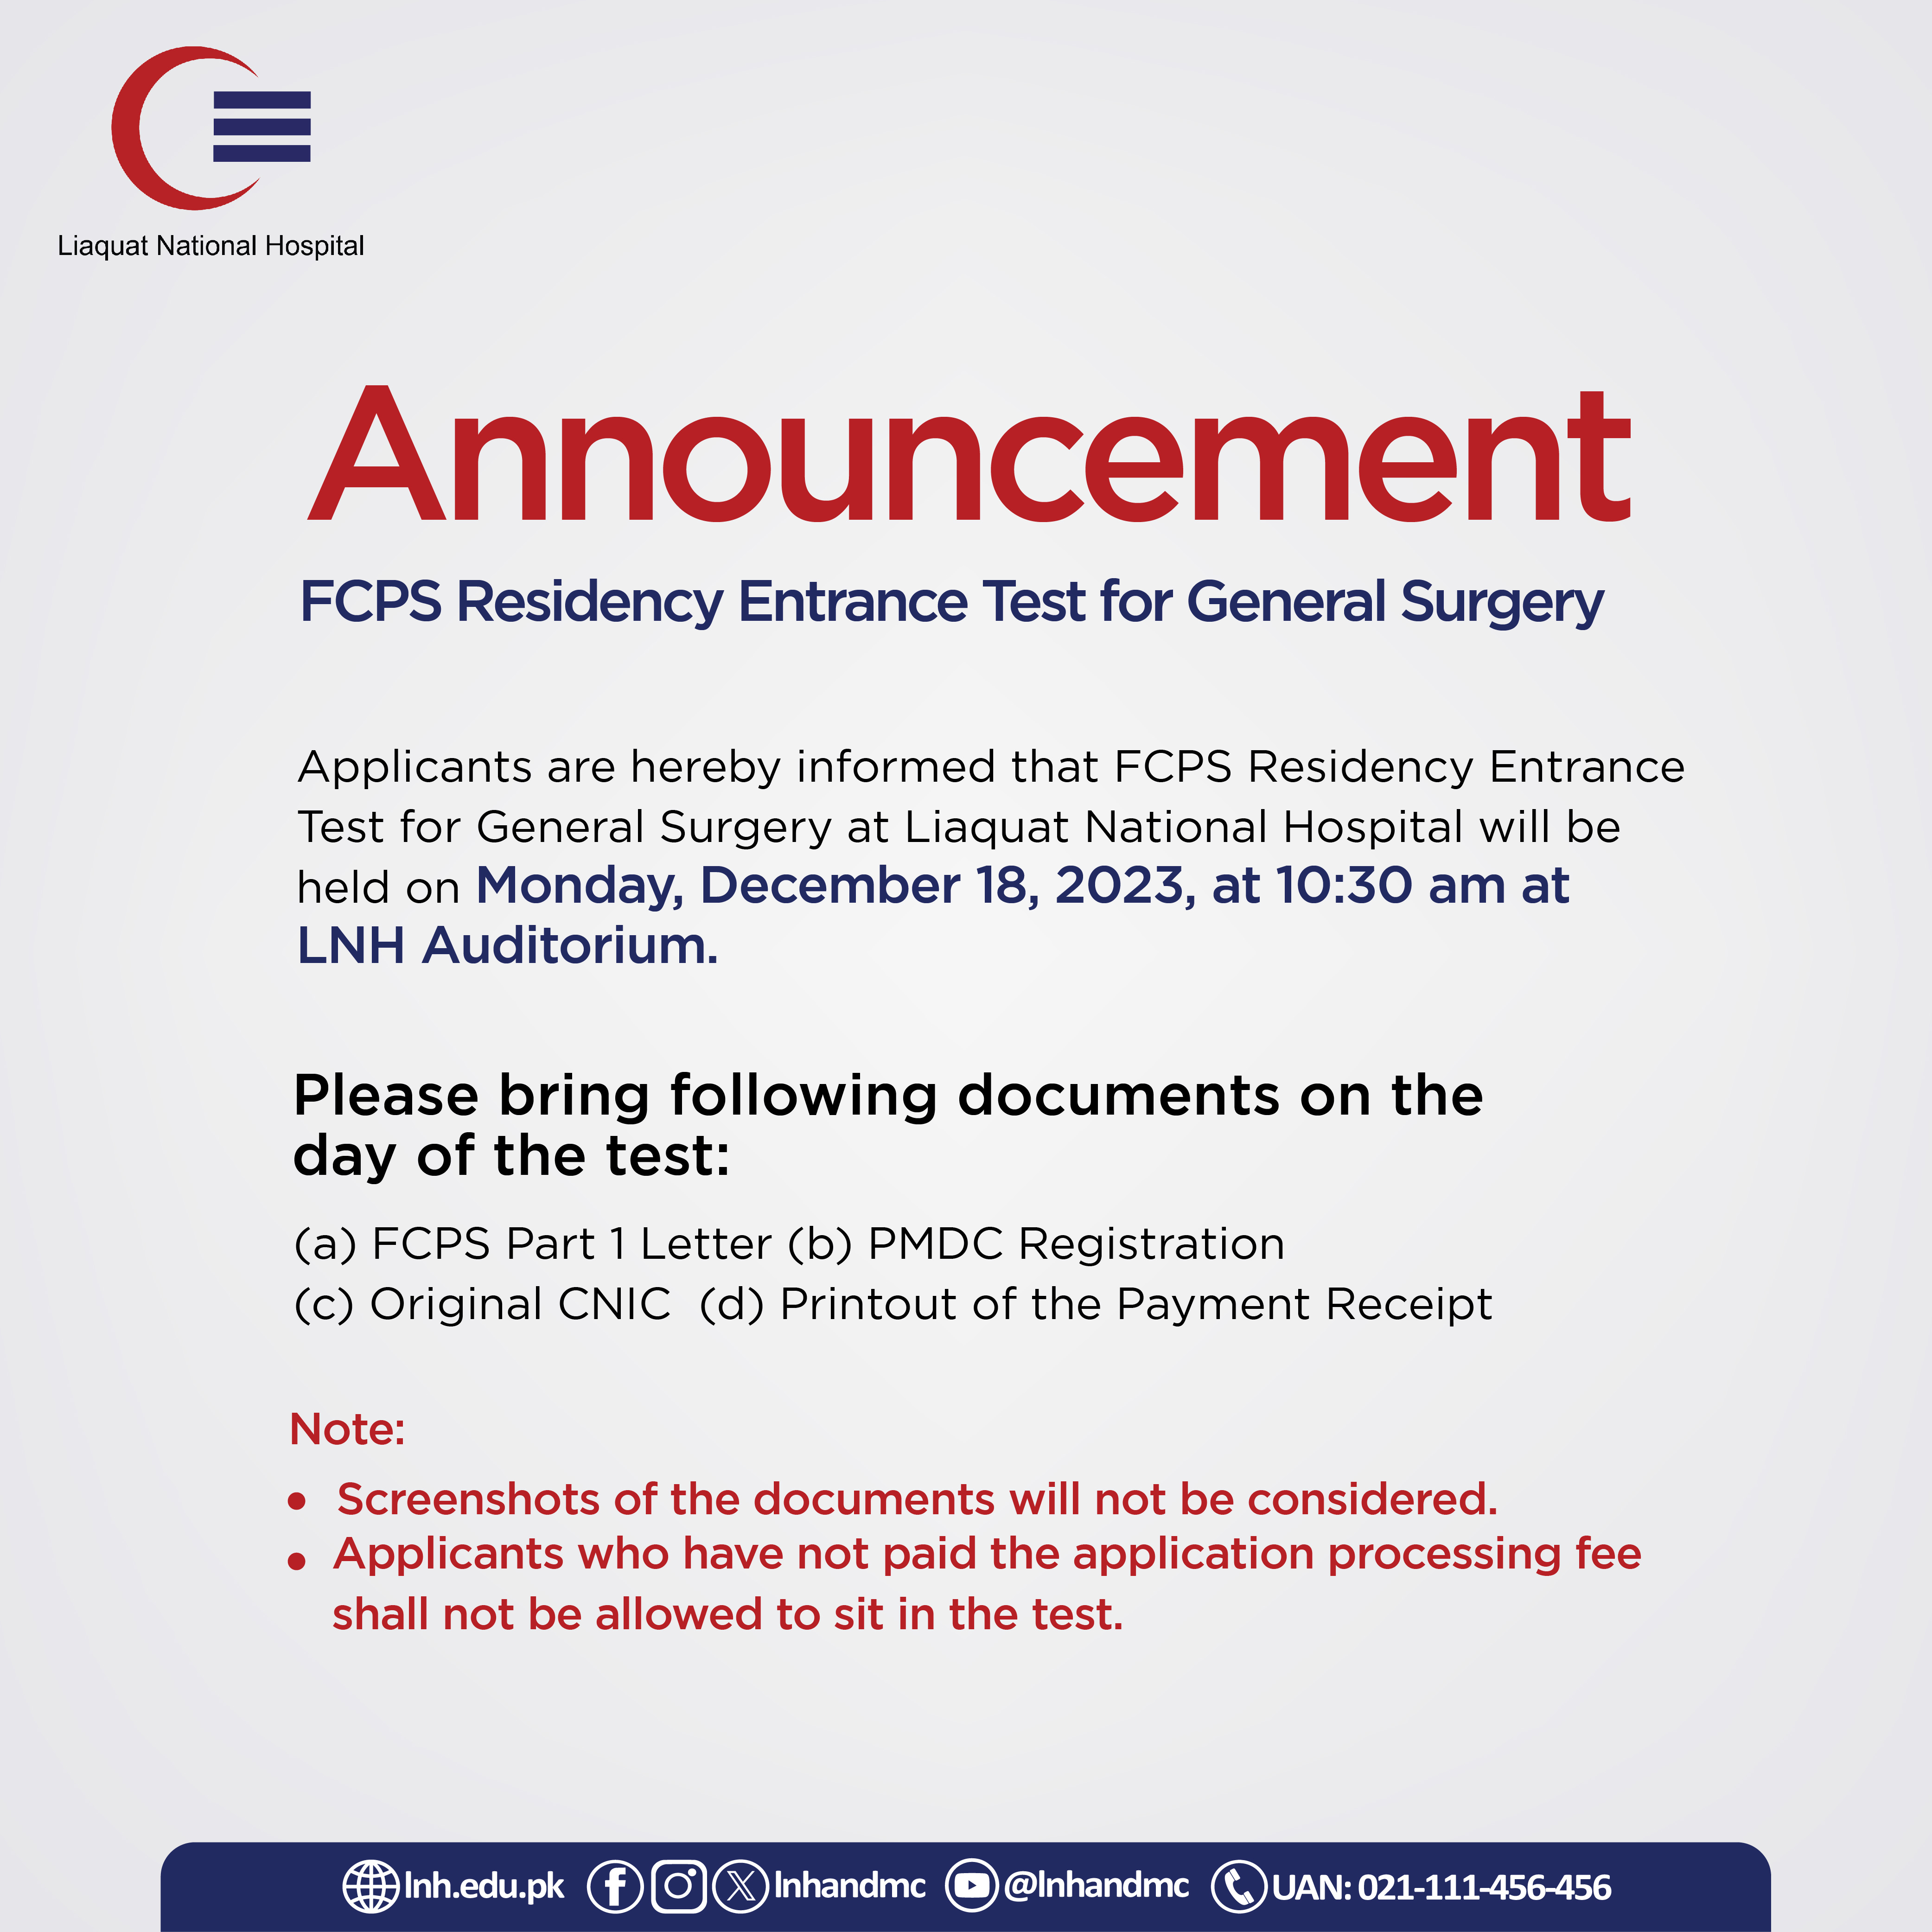 FCPS Residency Entrance Test for General Surgery